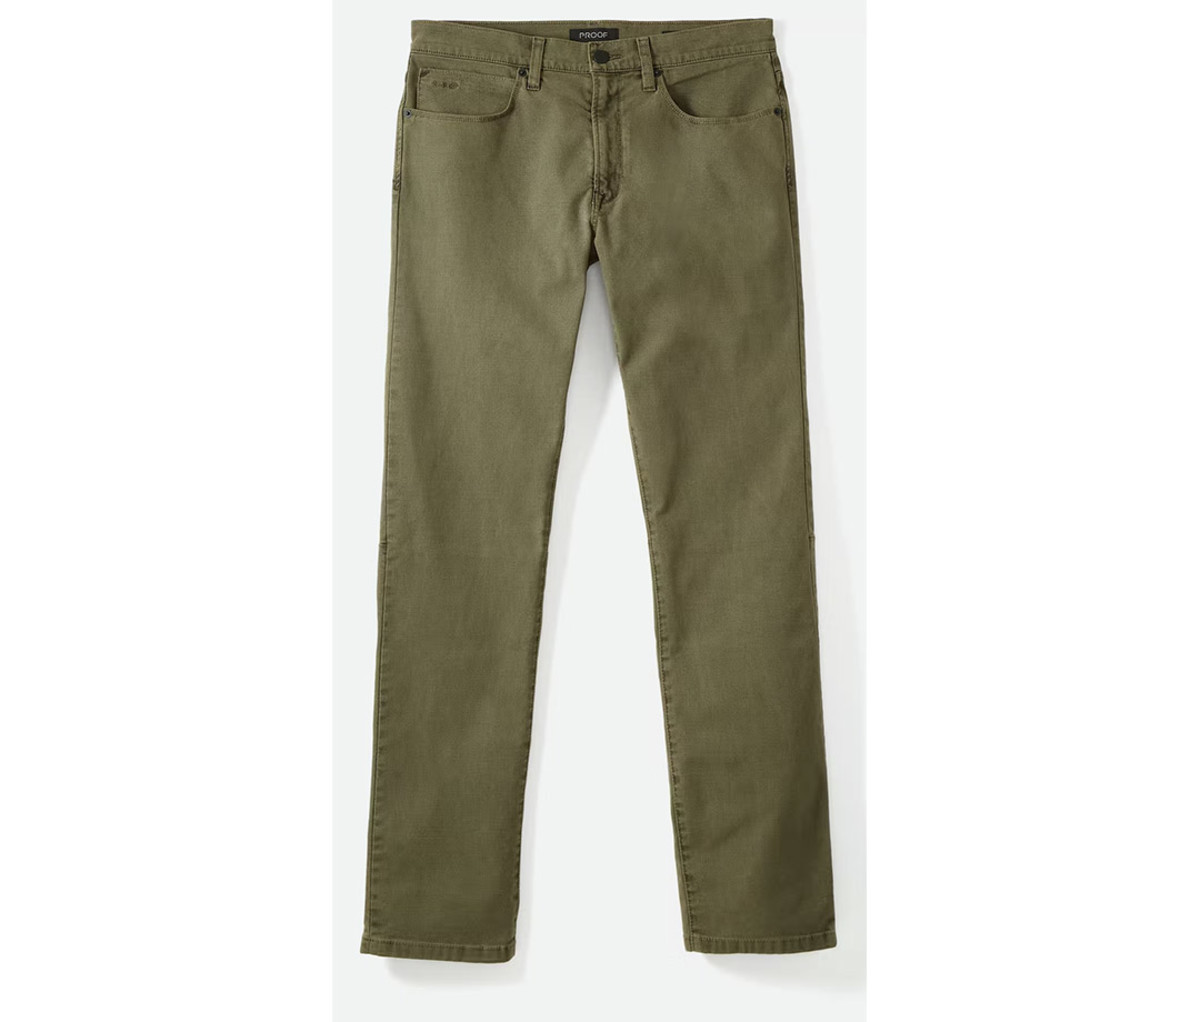 Save on a New Pair of Proof Rover Pants From Huckberry Today - Men's Journal